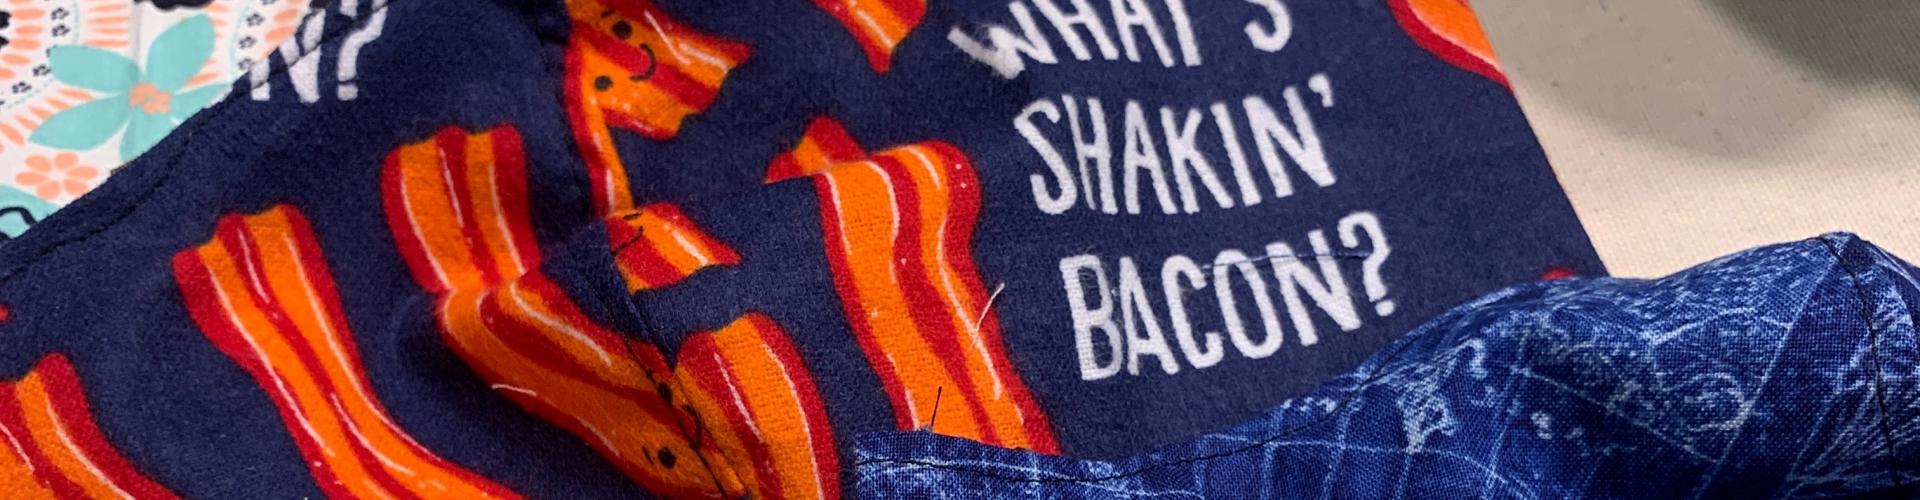 A navy piece of cloth contains strips of bacon and the words "What's Shakin' Bacon?"